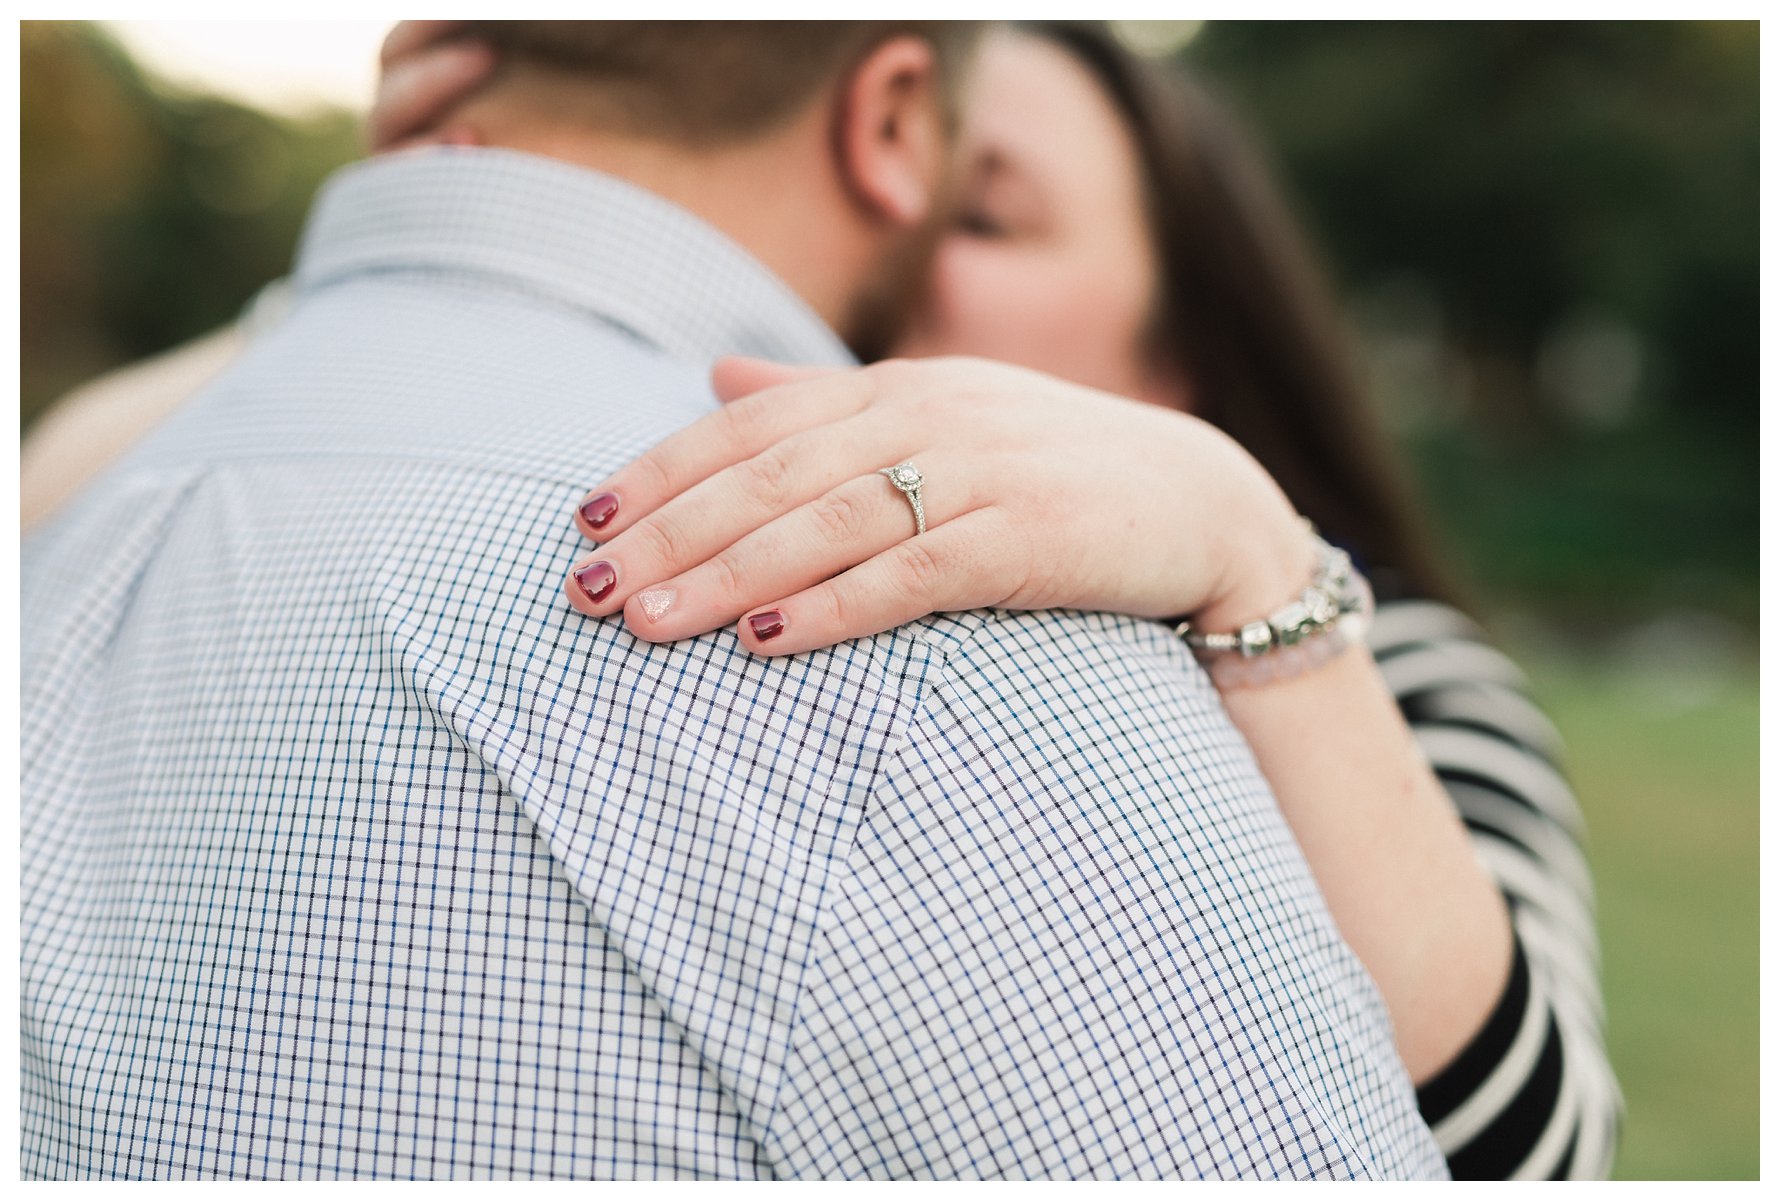 Raleigh, NC Engagement Photography by Amanda & Grady